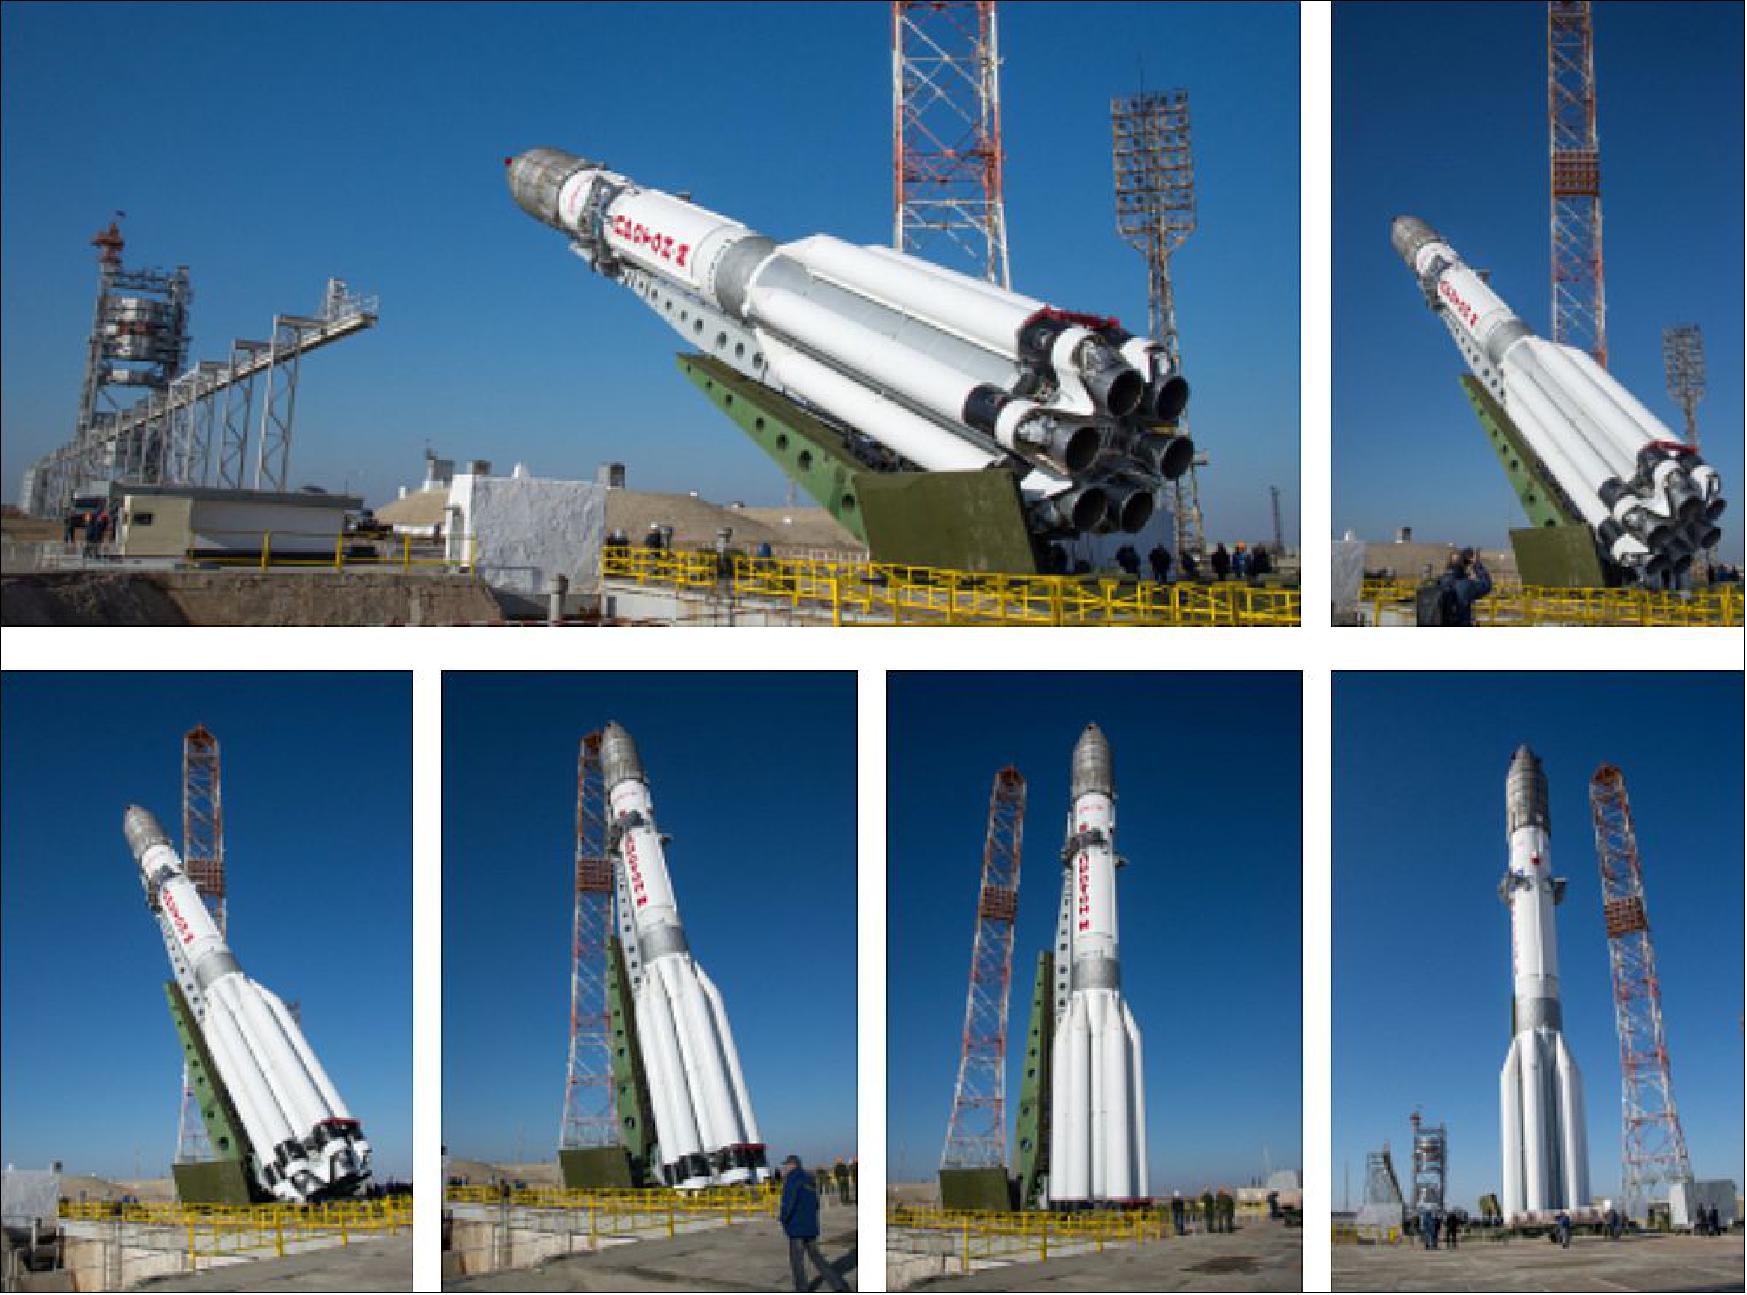 Figure 7: Proton-M rocket with ExoMars 2016 Trace Gas Orbiter and Schiaparelli module at the launch pad in Baikonur, Kazakhstan (image credit: ESA, B. Bethge) 17)